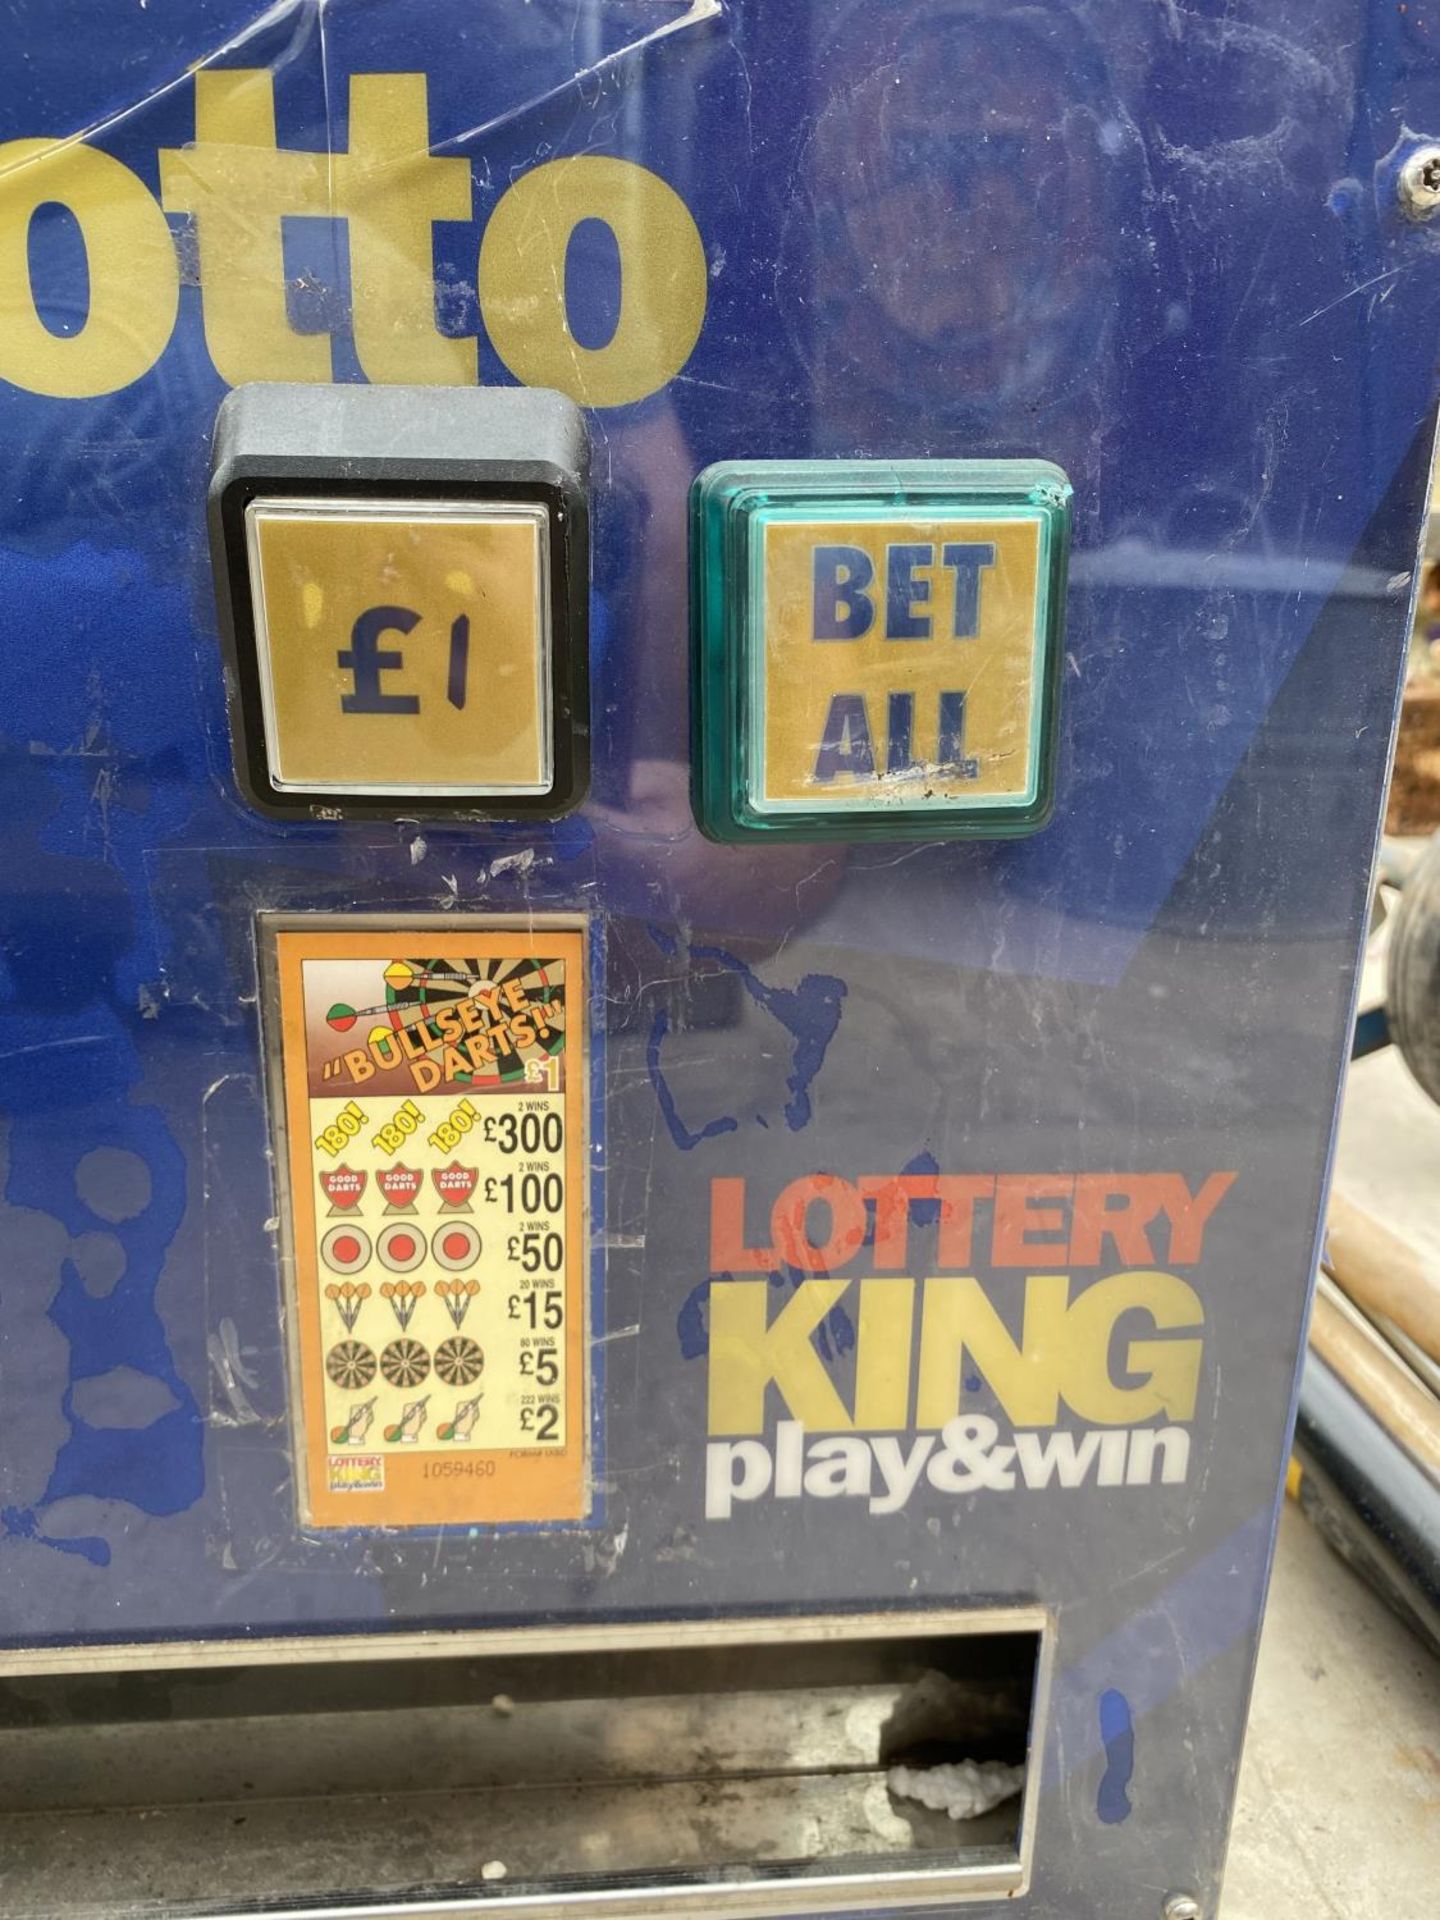 A LOTTERY KING PLAY AND WIN MACHINE - Image 4 of 8